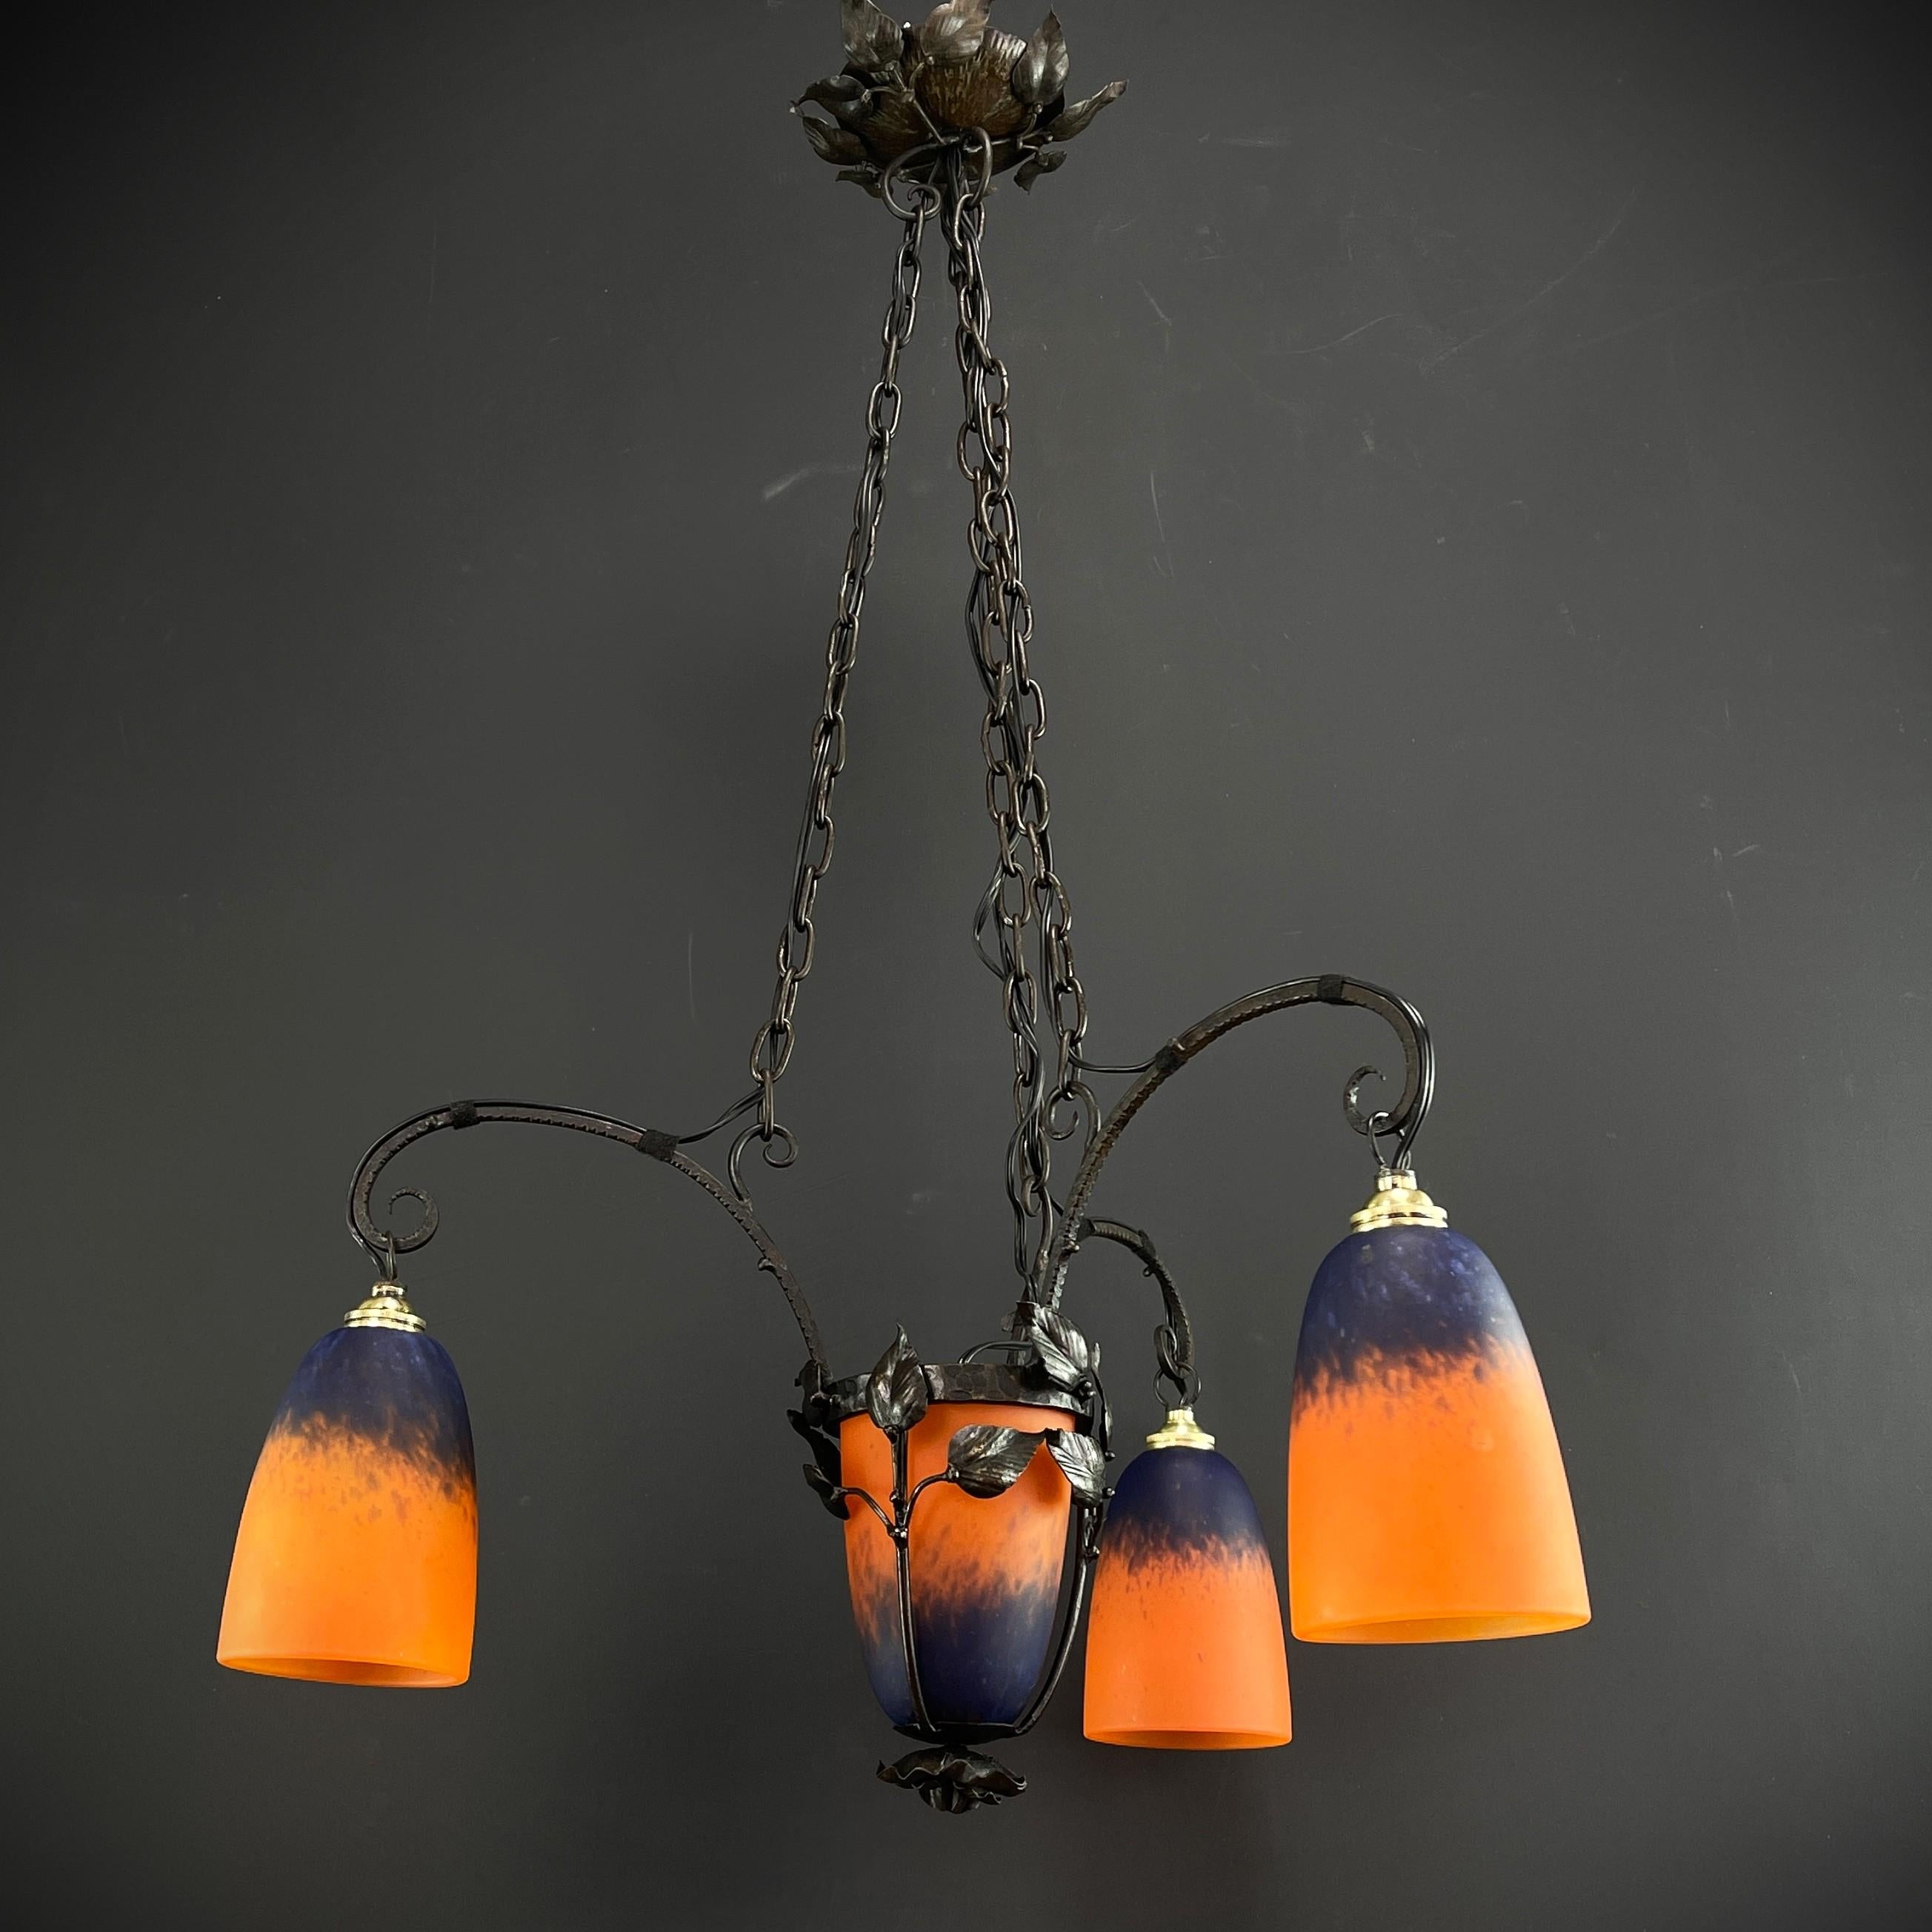 Art Deco chandelier by Schneider - 1930s

The ART DECO ceiling lamp is a remarkable example of early 20th century craftsmanship and style. 

The signature 